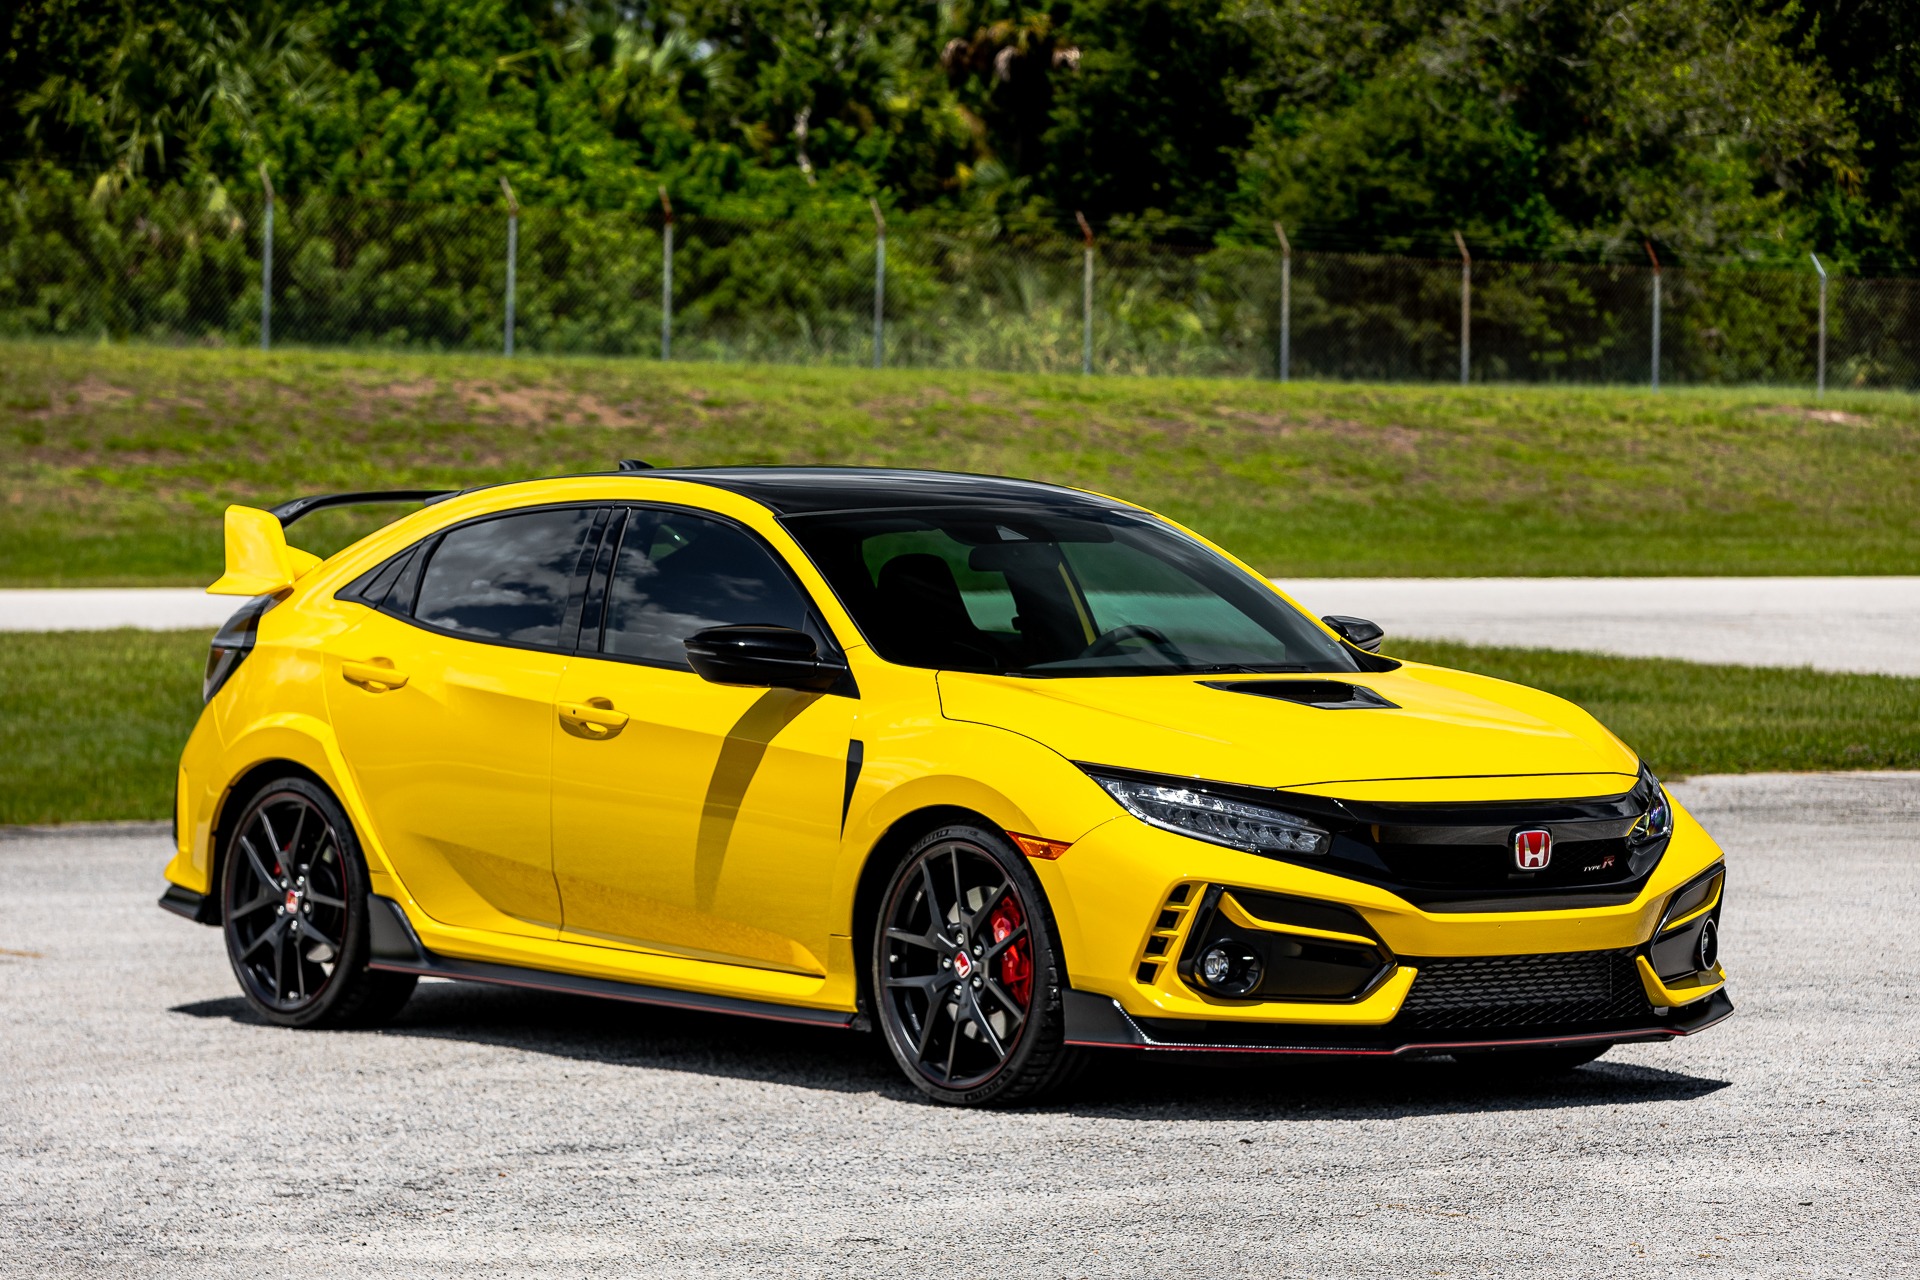 Used 2021 Honda Civic Type R Limited Edition for sale $53,550 at McLaren Orlando LLC in Titusville FL 32780 1